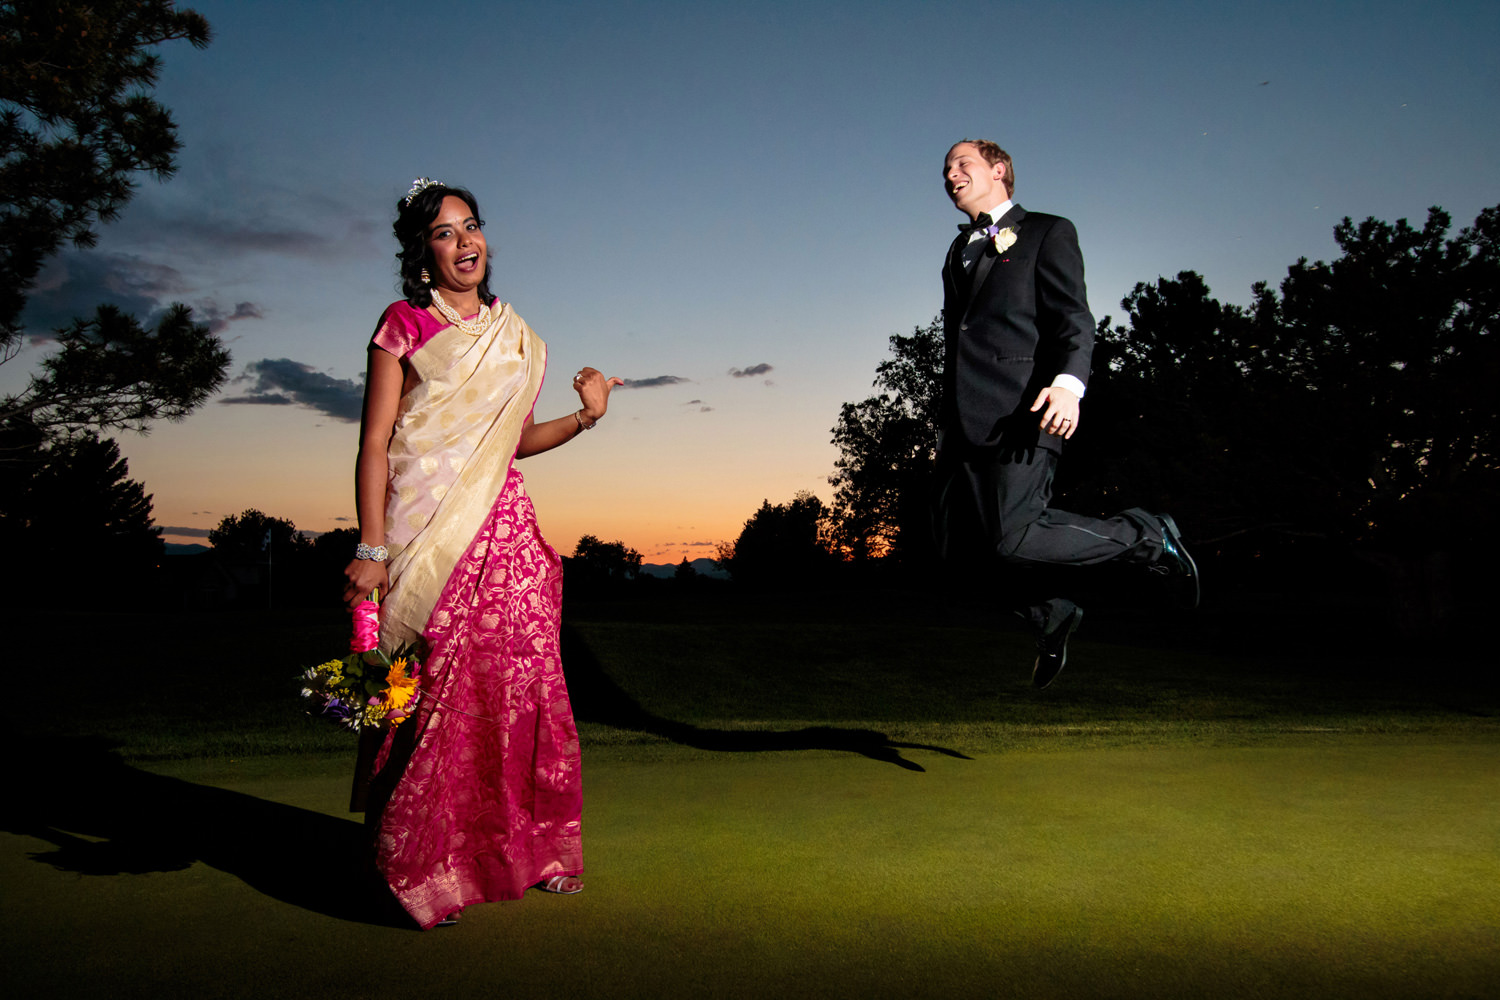 fort-collins-country-club-wedding-photographer-tomKphoto083.jpg